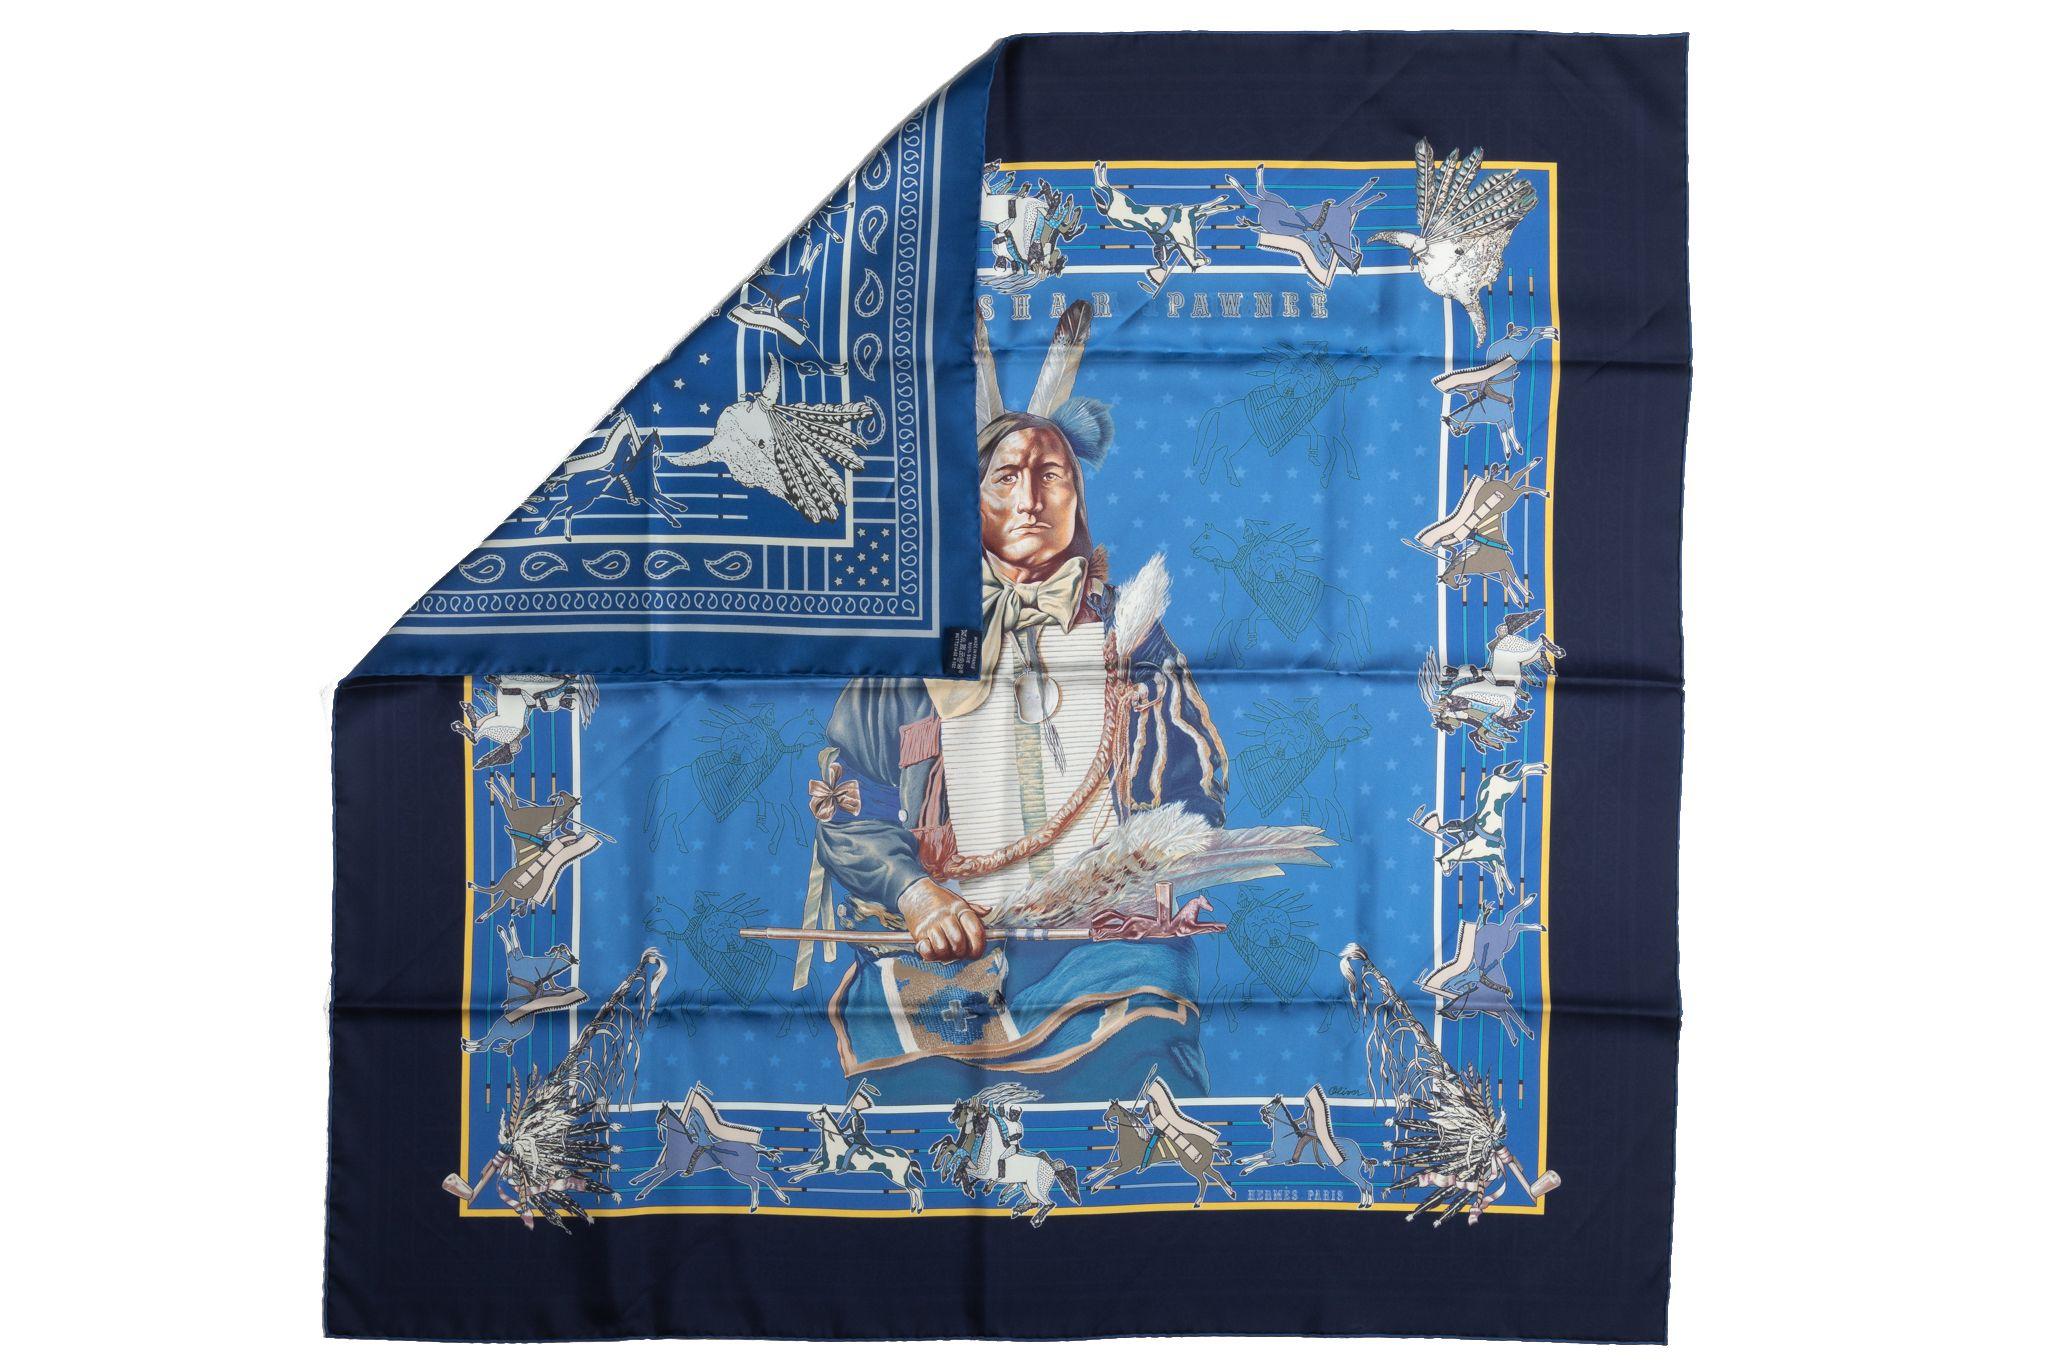 Hermès silk twill Pani La Shar Pawnee 90cm scarf in turquoise with blue color. Designed by artist Kermit Oliver. Limited edition reissue 